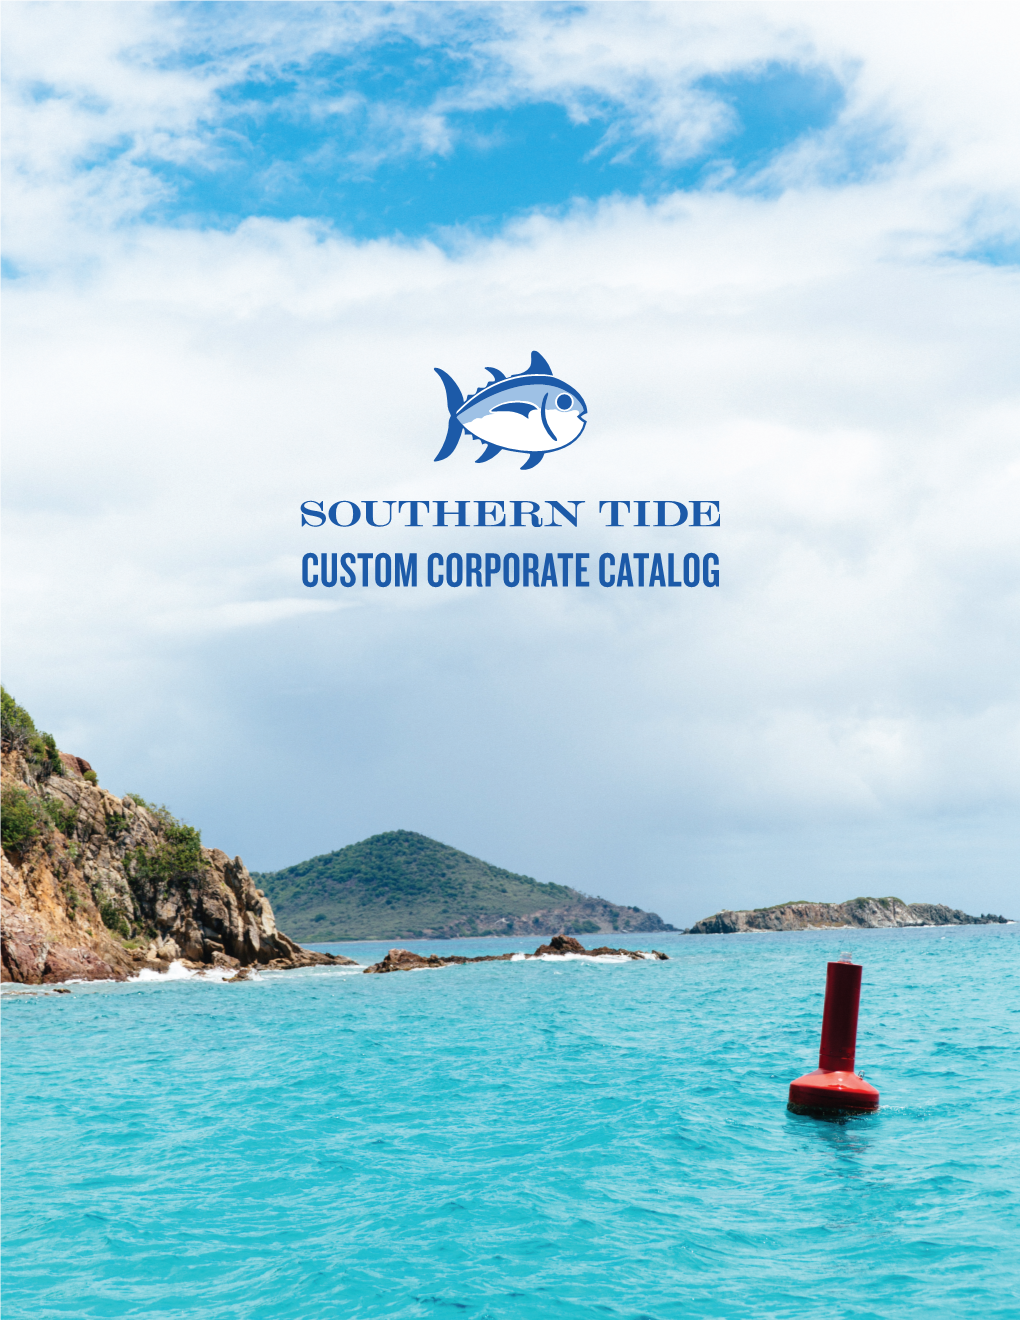 View the Southern Tide Custom Corporate Catalog